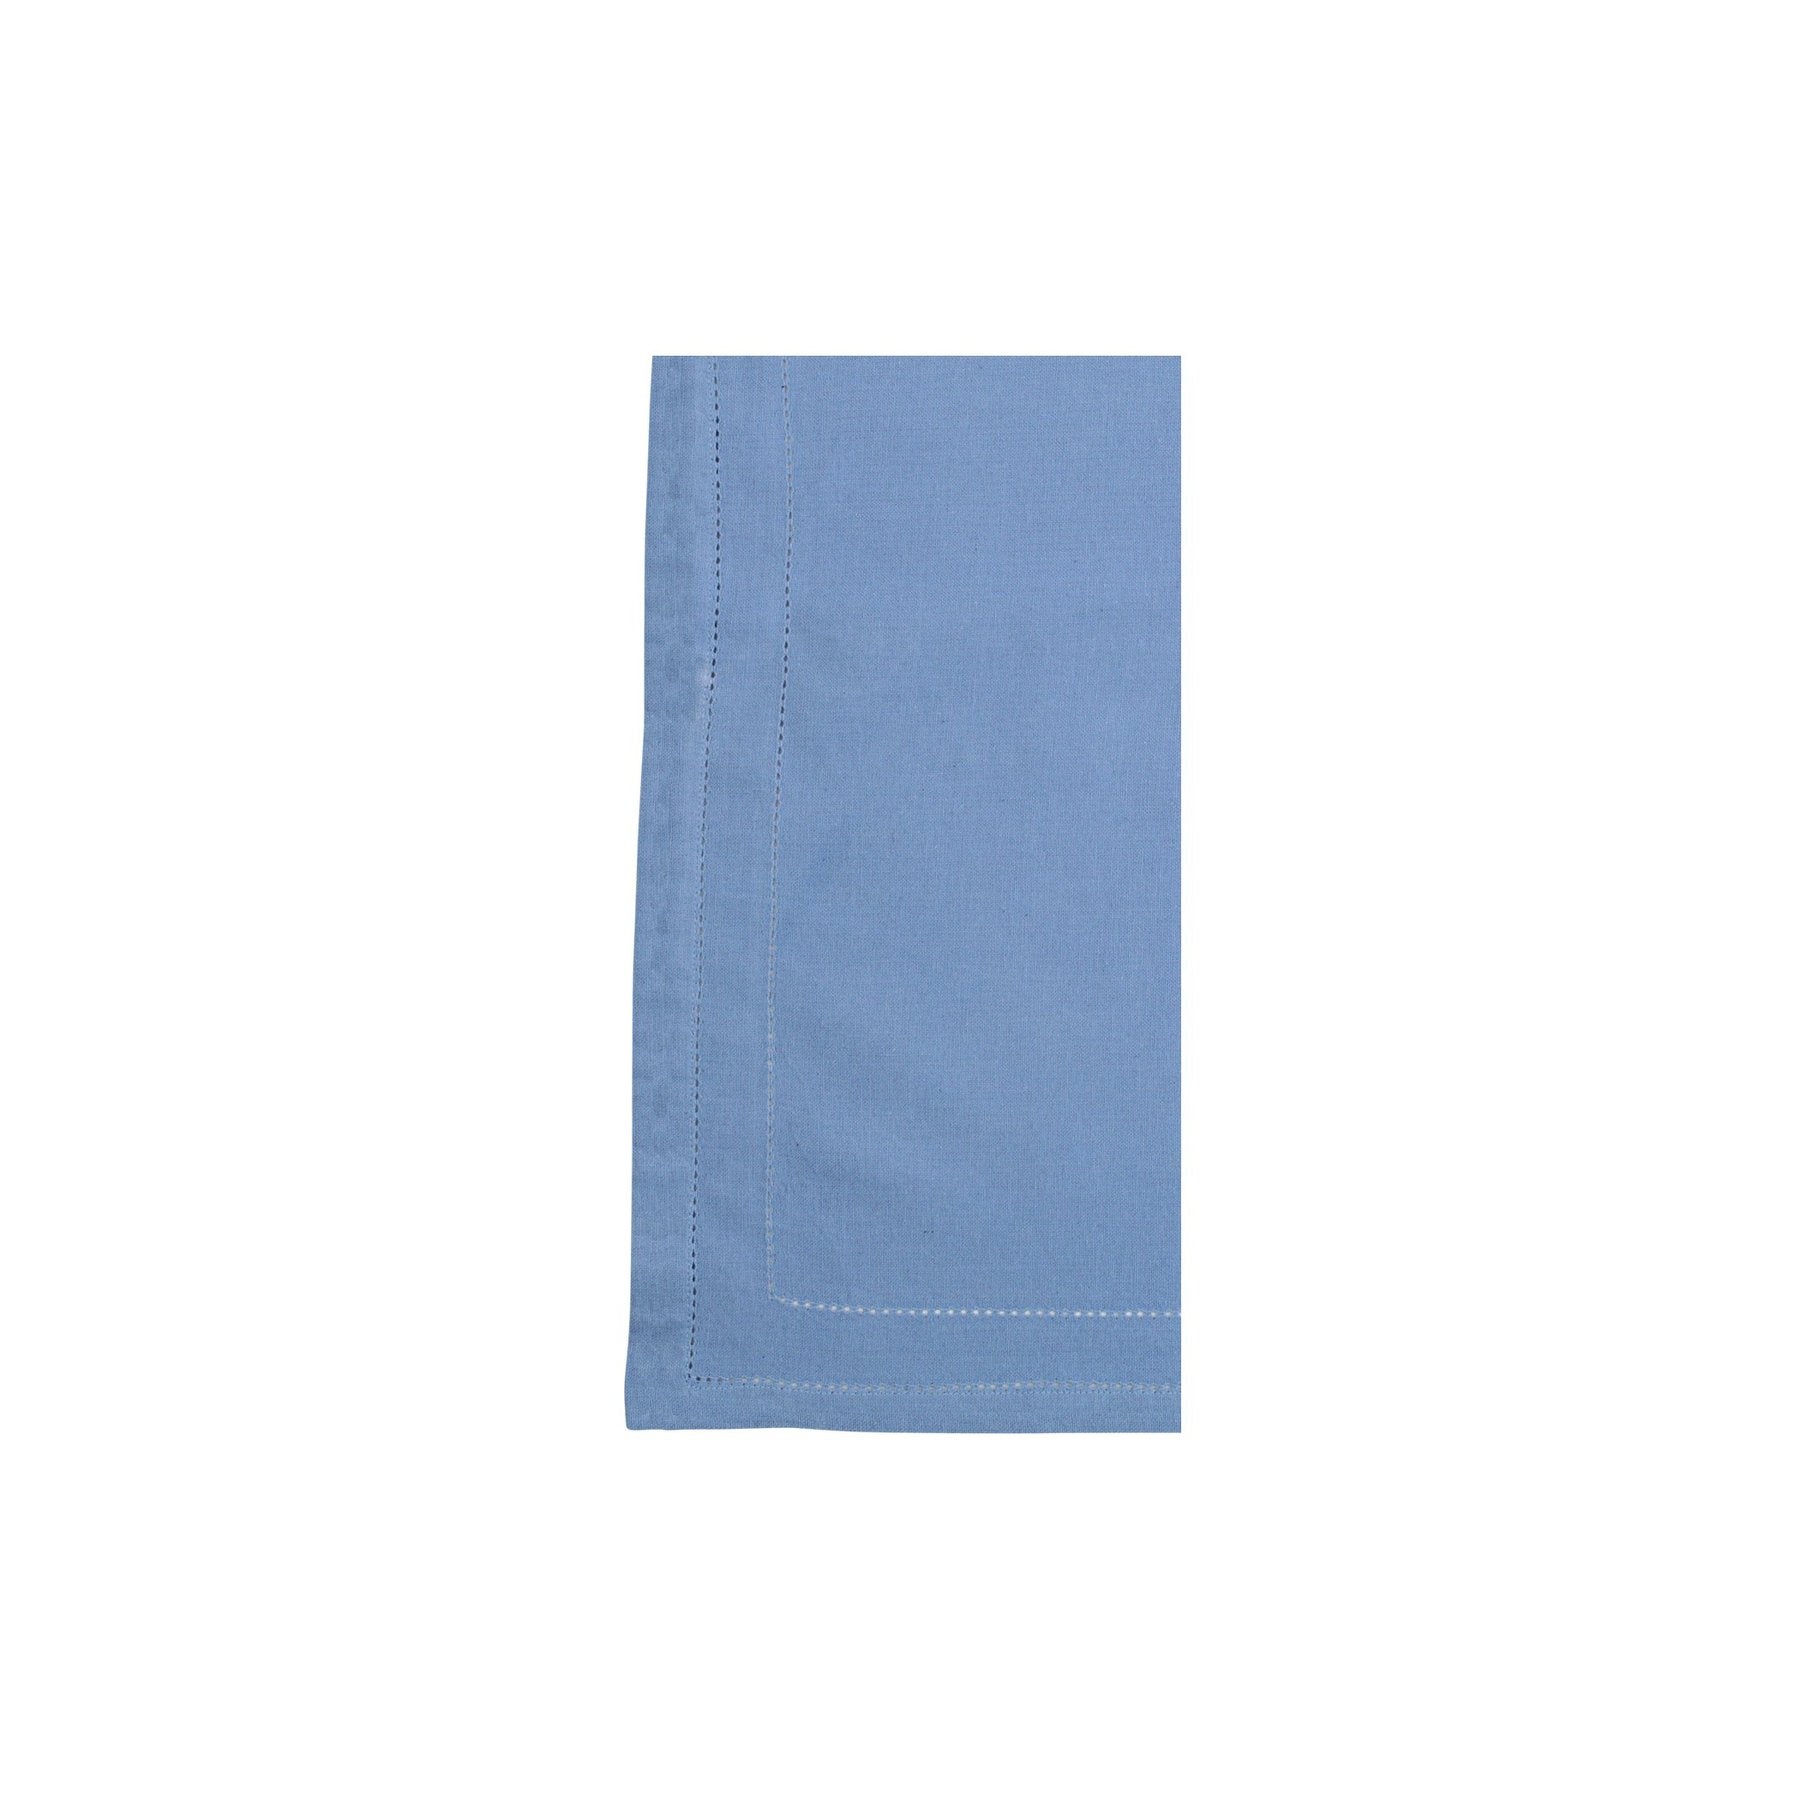 Cotone Linens Cornflower Blue Napkins With Double Stitching - Set of 4